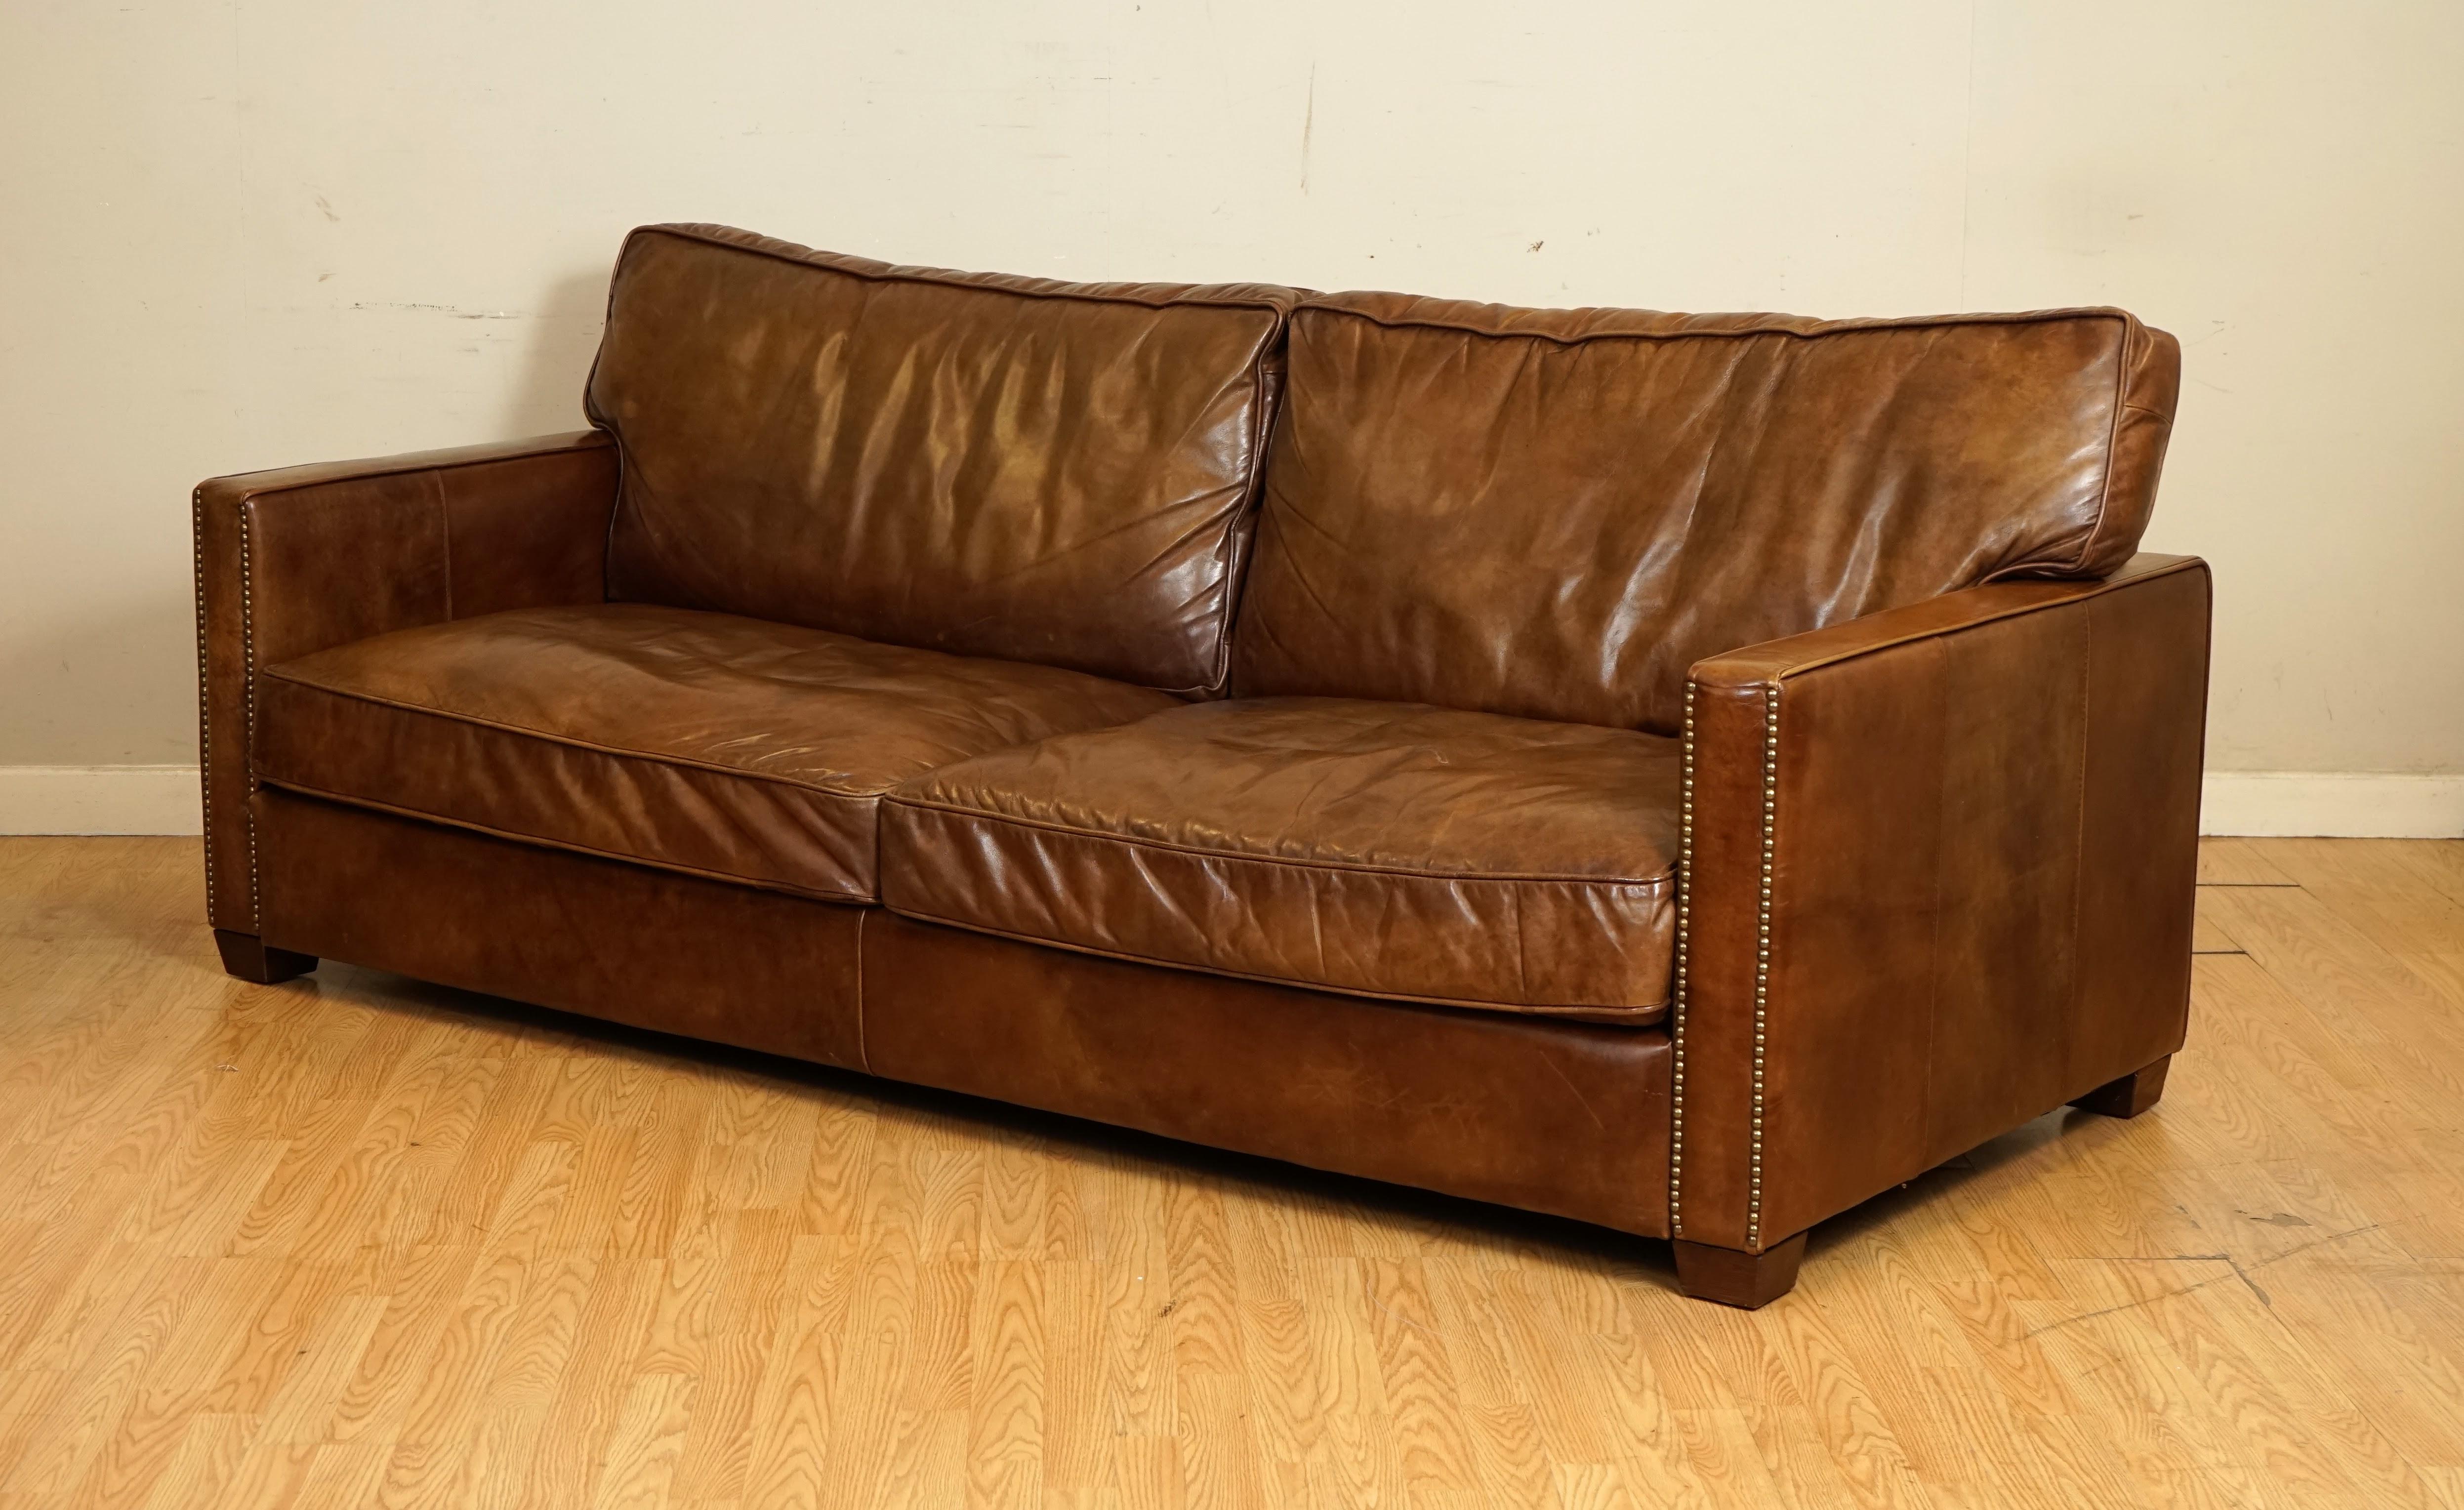 British Gorgeous Timothy Oulton Viscount Old Sadle Nut Brown Leather Three Seater Sofa